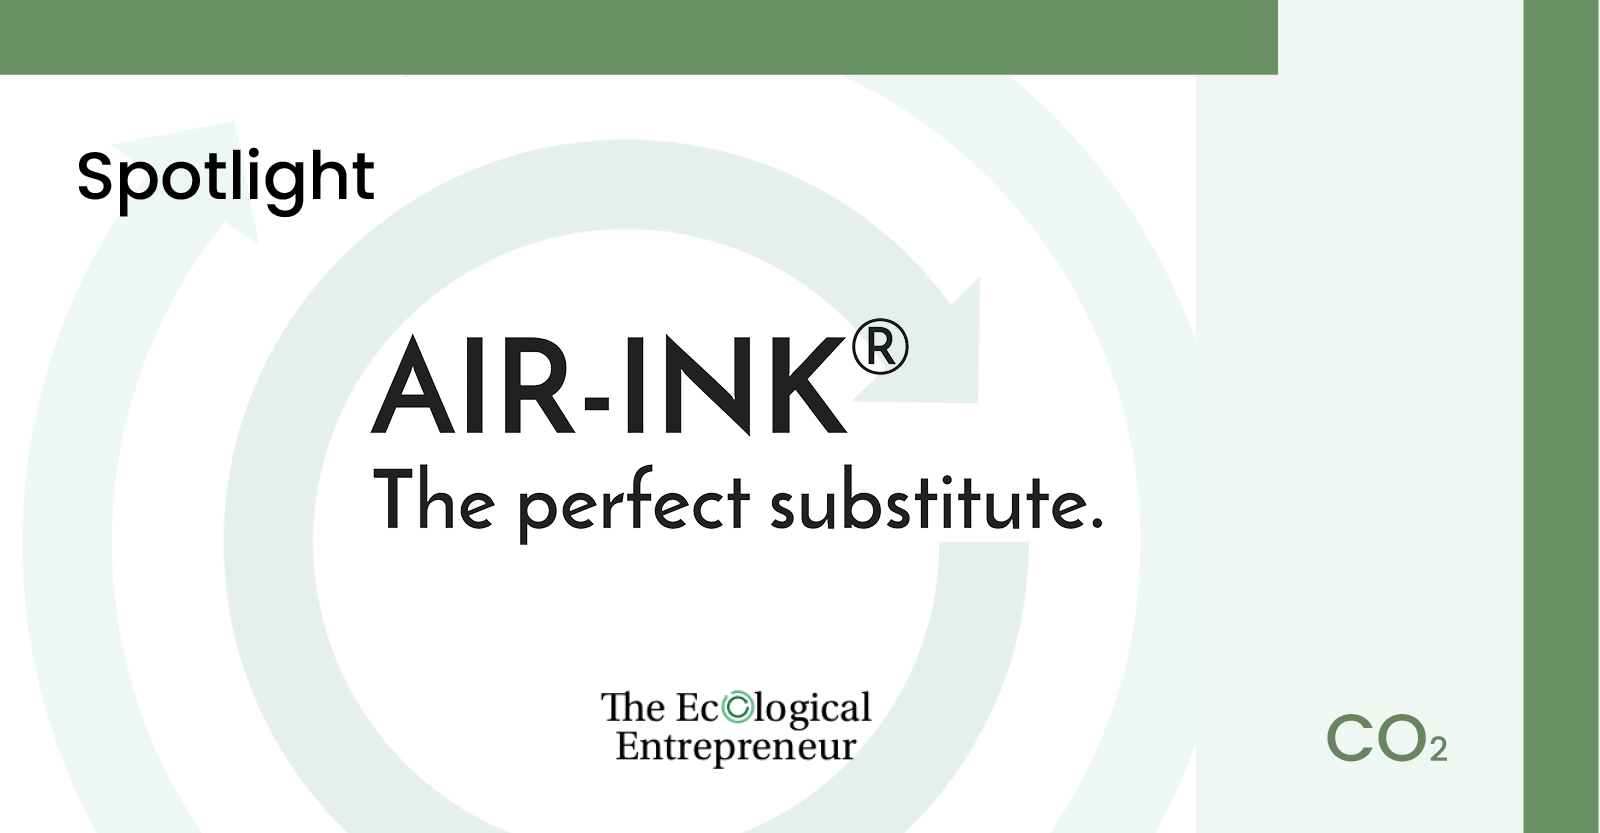 Air Ink Spotlight by the Ecological Entrepreneur